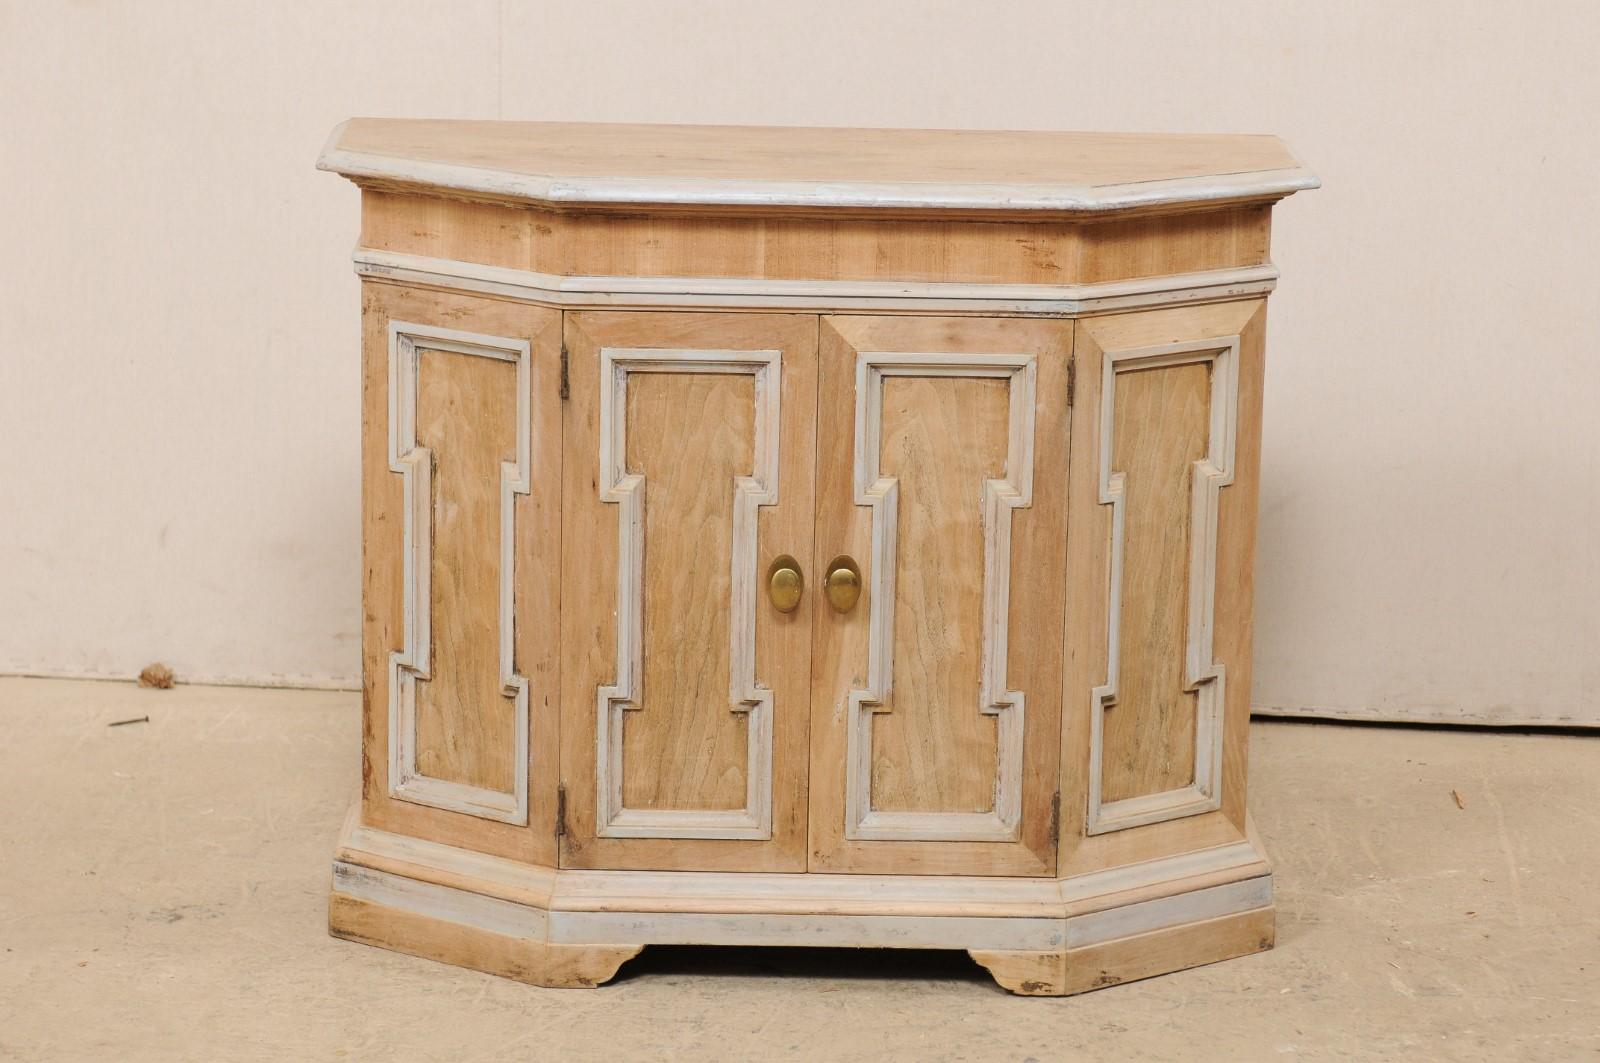 An Italian petite-sized console cabinet from the mid-20th century. This vintage cabinet from Italy features a top with flat sided front giving way to two chamfered sides, with the cabinet beneath mimicking the shape of the canted top. The case